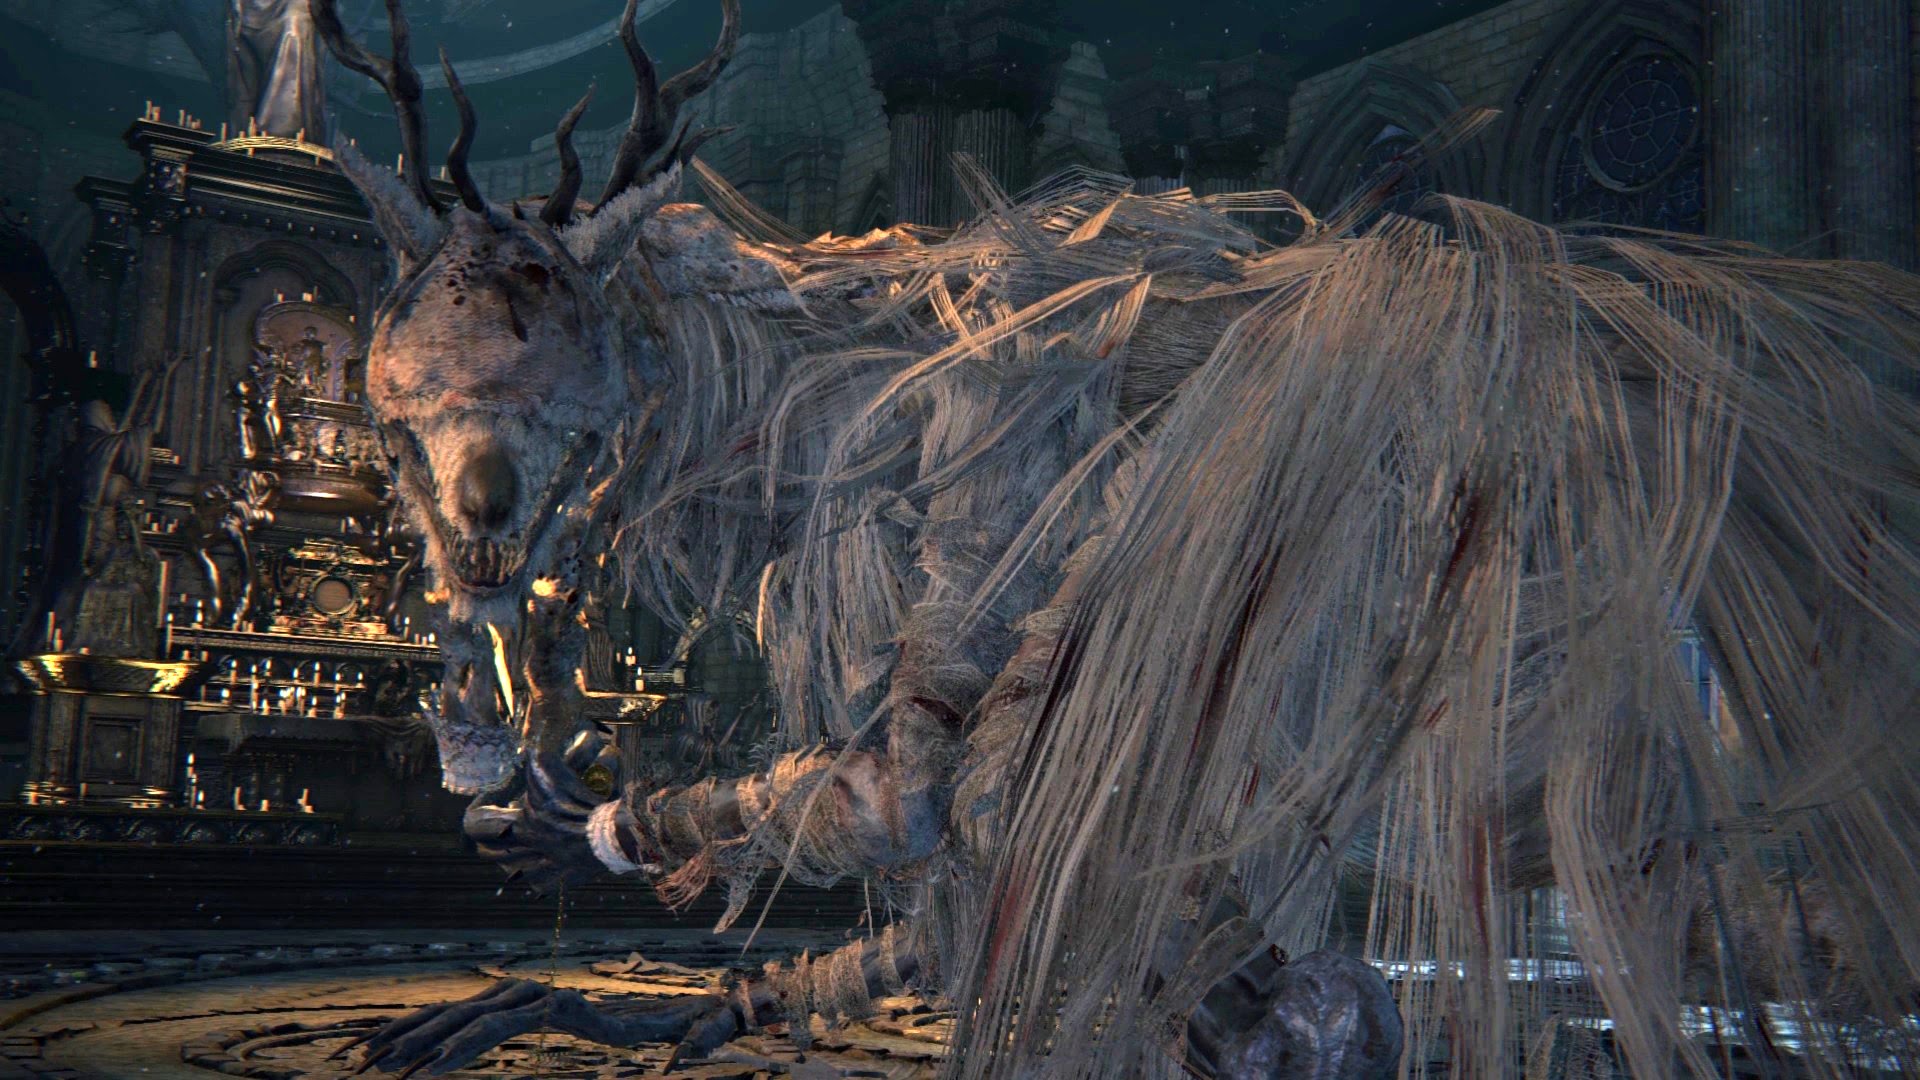 How To Access Bloodborne’s The Old Hunters DLC